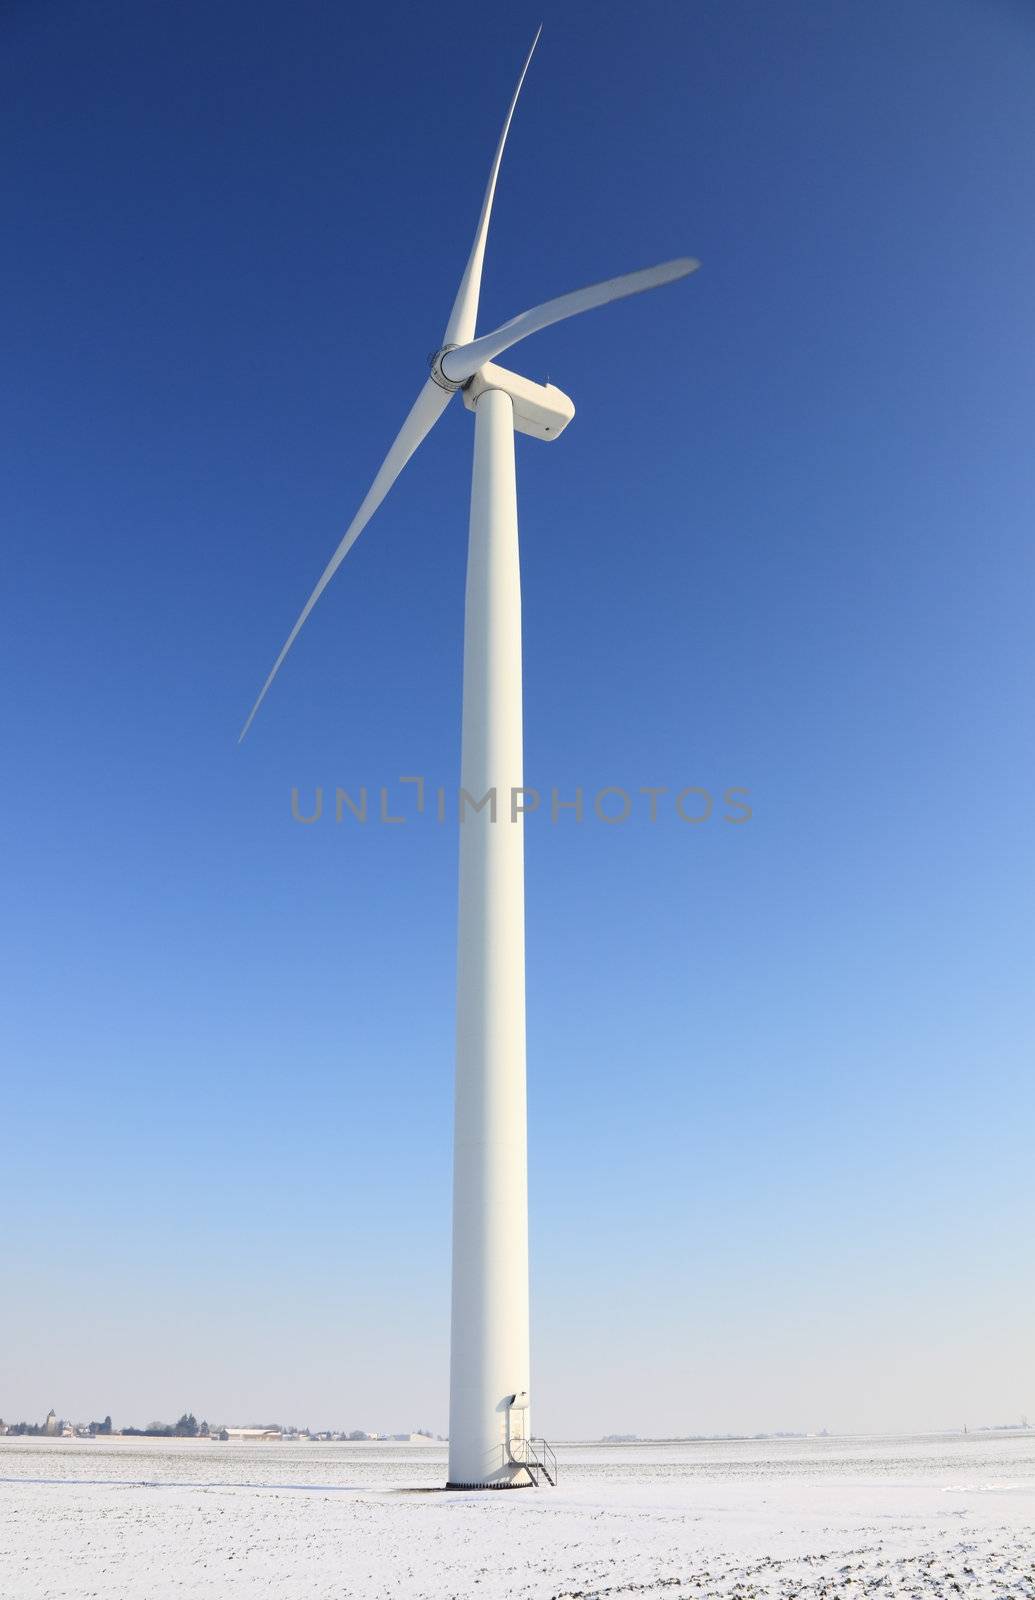 Wind turbine in a field covered by sbow in winter.There is a little motion blur at the tips of the blades.